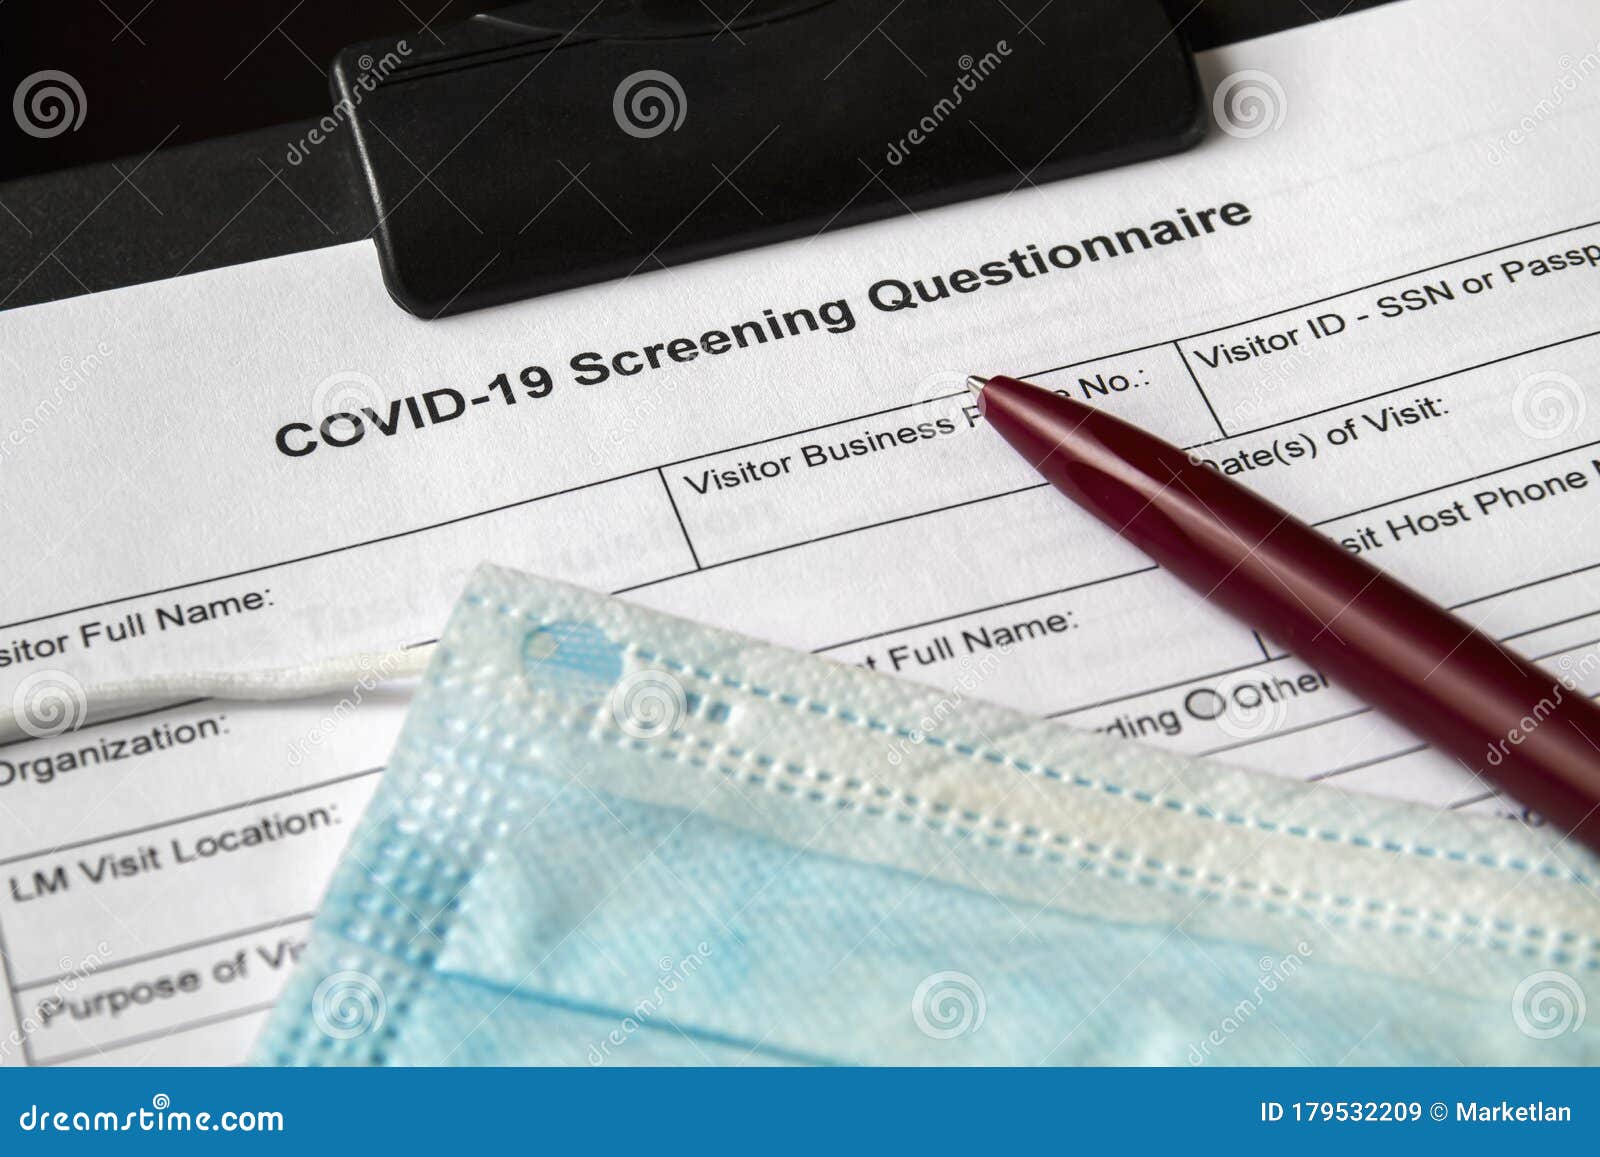 covid-19 screening questionnaire form with medical mask and a pen on it. healthcare and medical concept. closeup